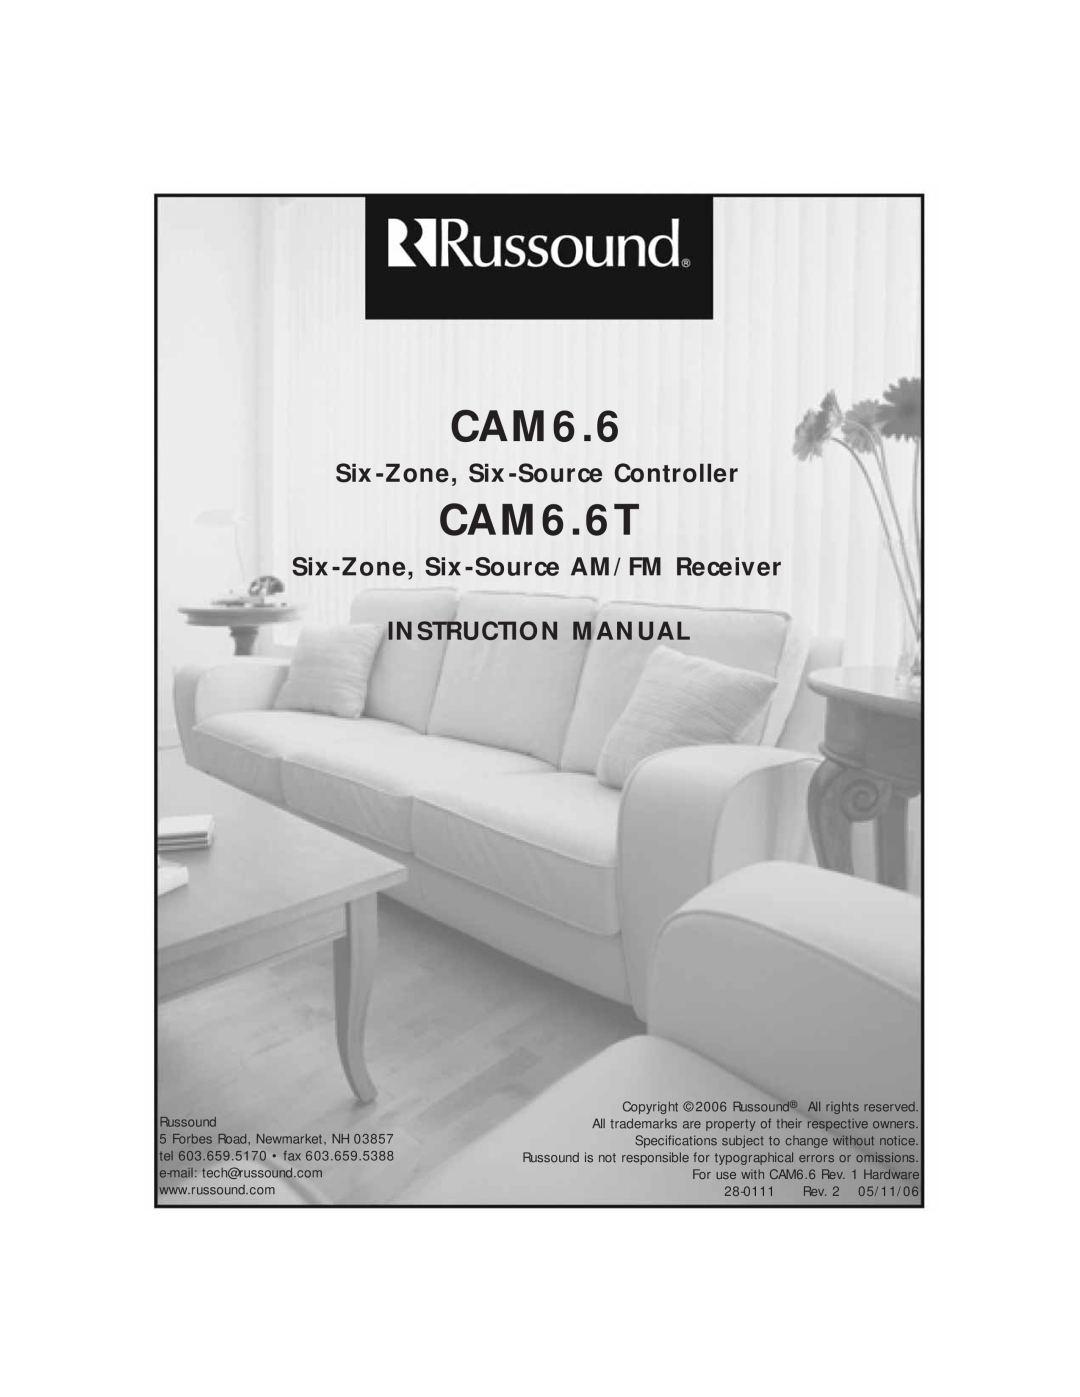 Russound CAM6.6T instruction manual Six-Zone, Six-SourceController, Six-Zone, Six-SourceAM/FM Receiver, Instruction Manual 